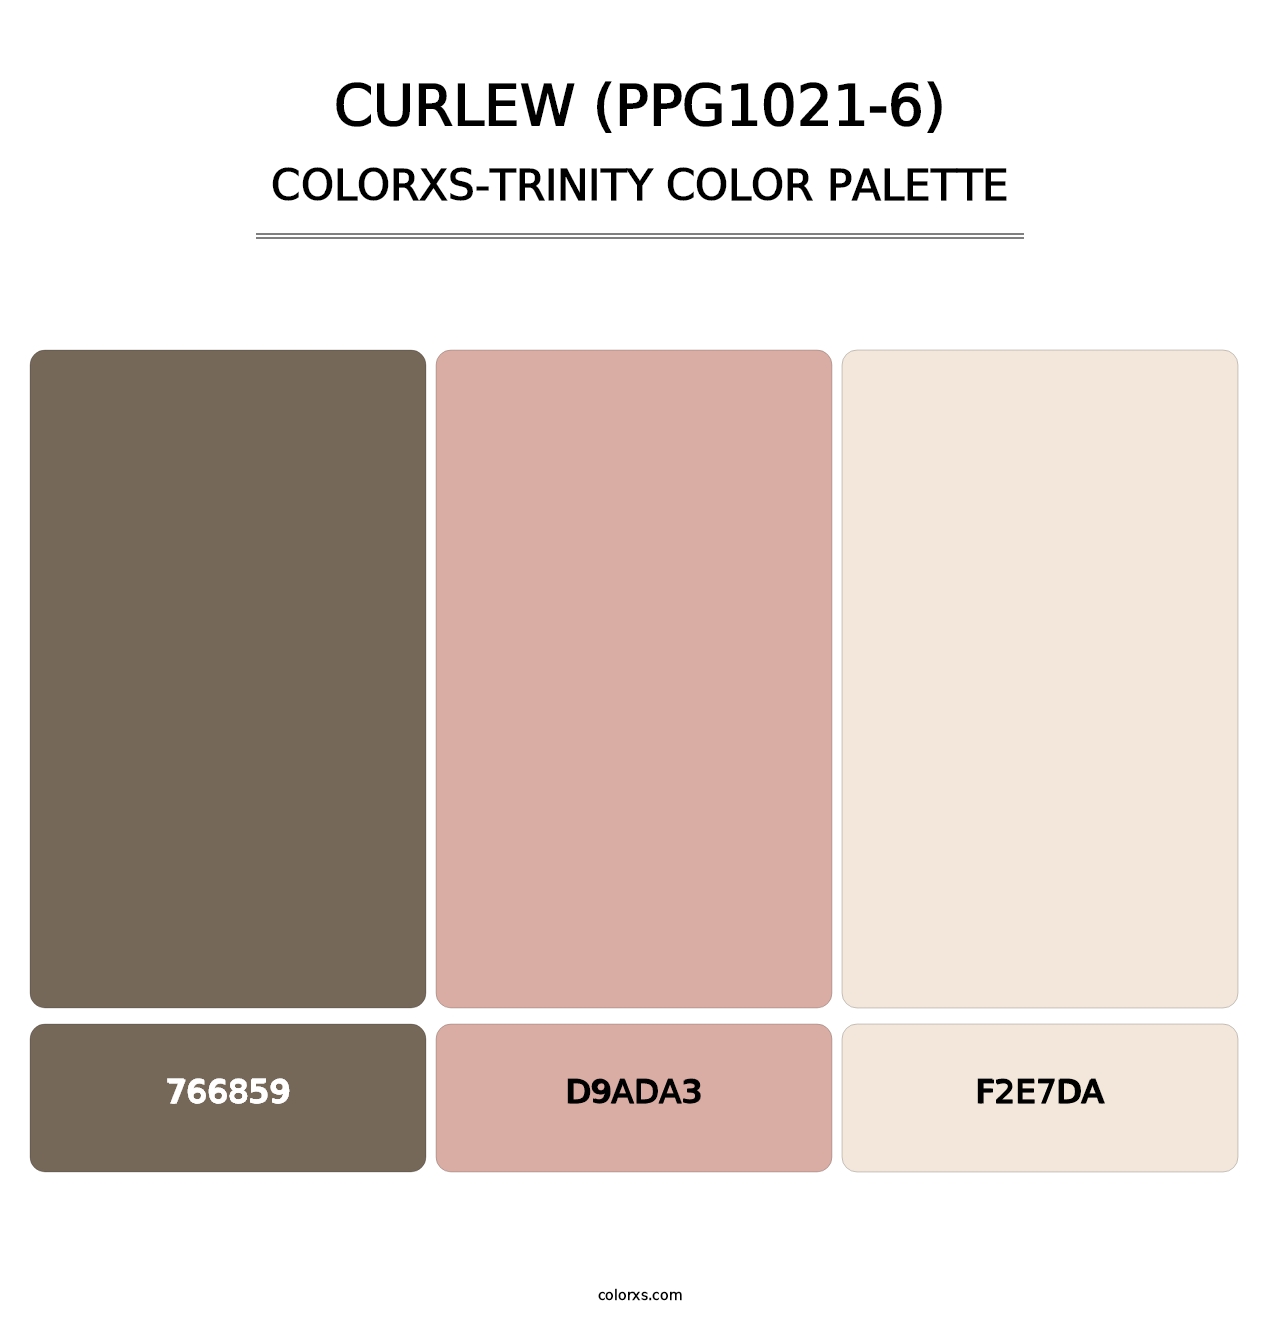 Curlew (PPG1021-6) - Colorxs Trinity Palette